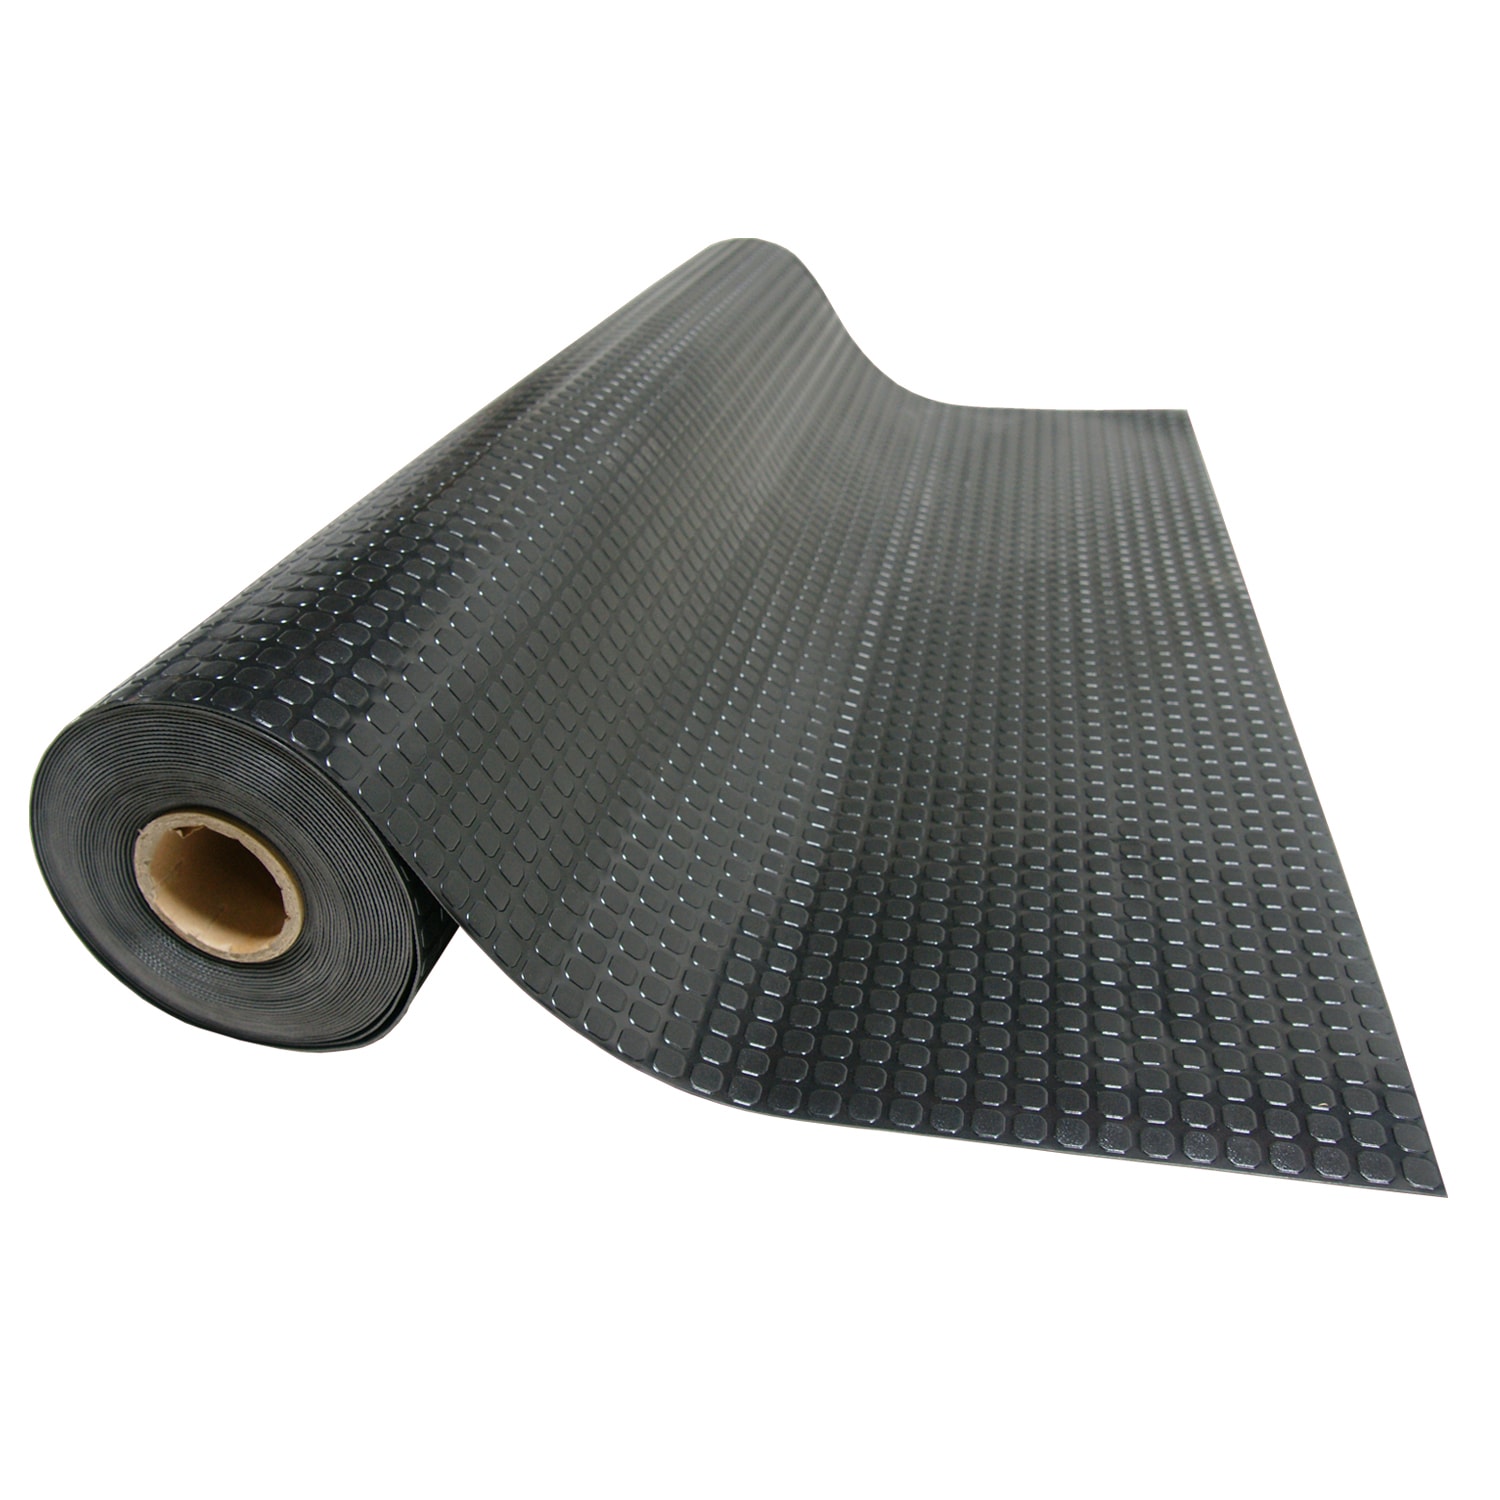 Non Slip Rubber Floor Mat for Bar floor with Interlocking feature,  Thickness: 12 mm Approx, Size